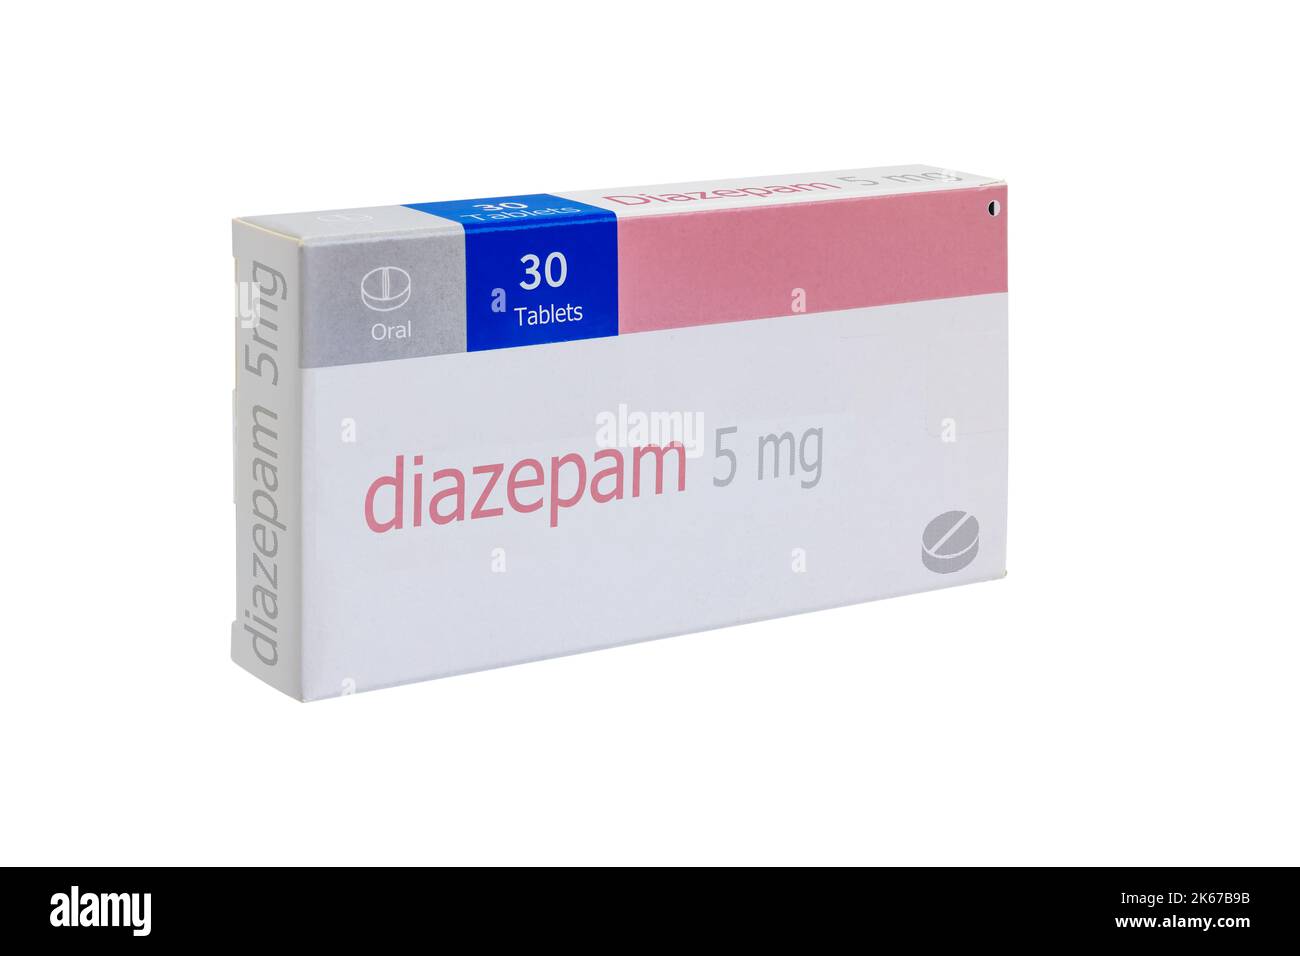 Box of Diazepam 5 mg. Diazepam is a medicine of the benzodiazepine family that produces a calming effect. It is used to treat anxiety, alcohol withdra Stock Photo